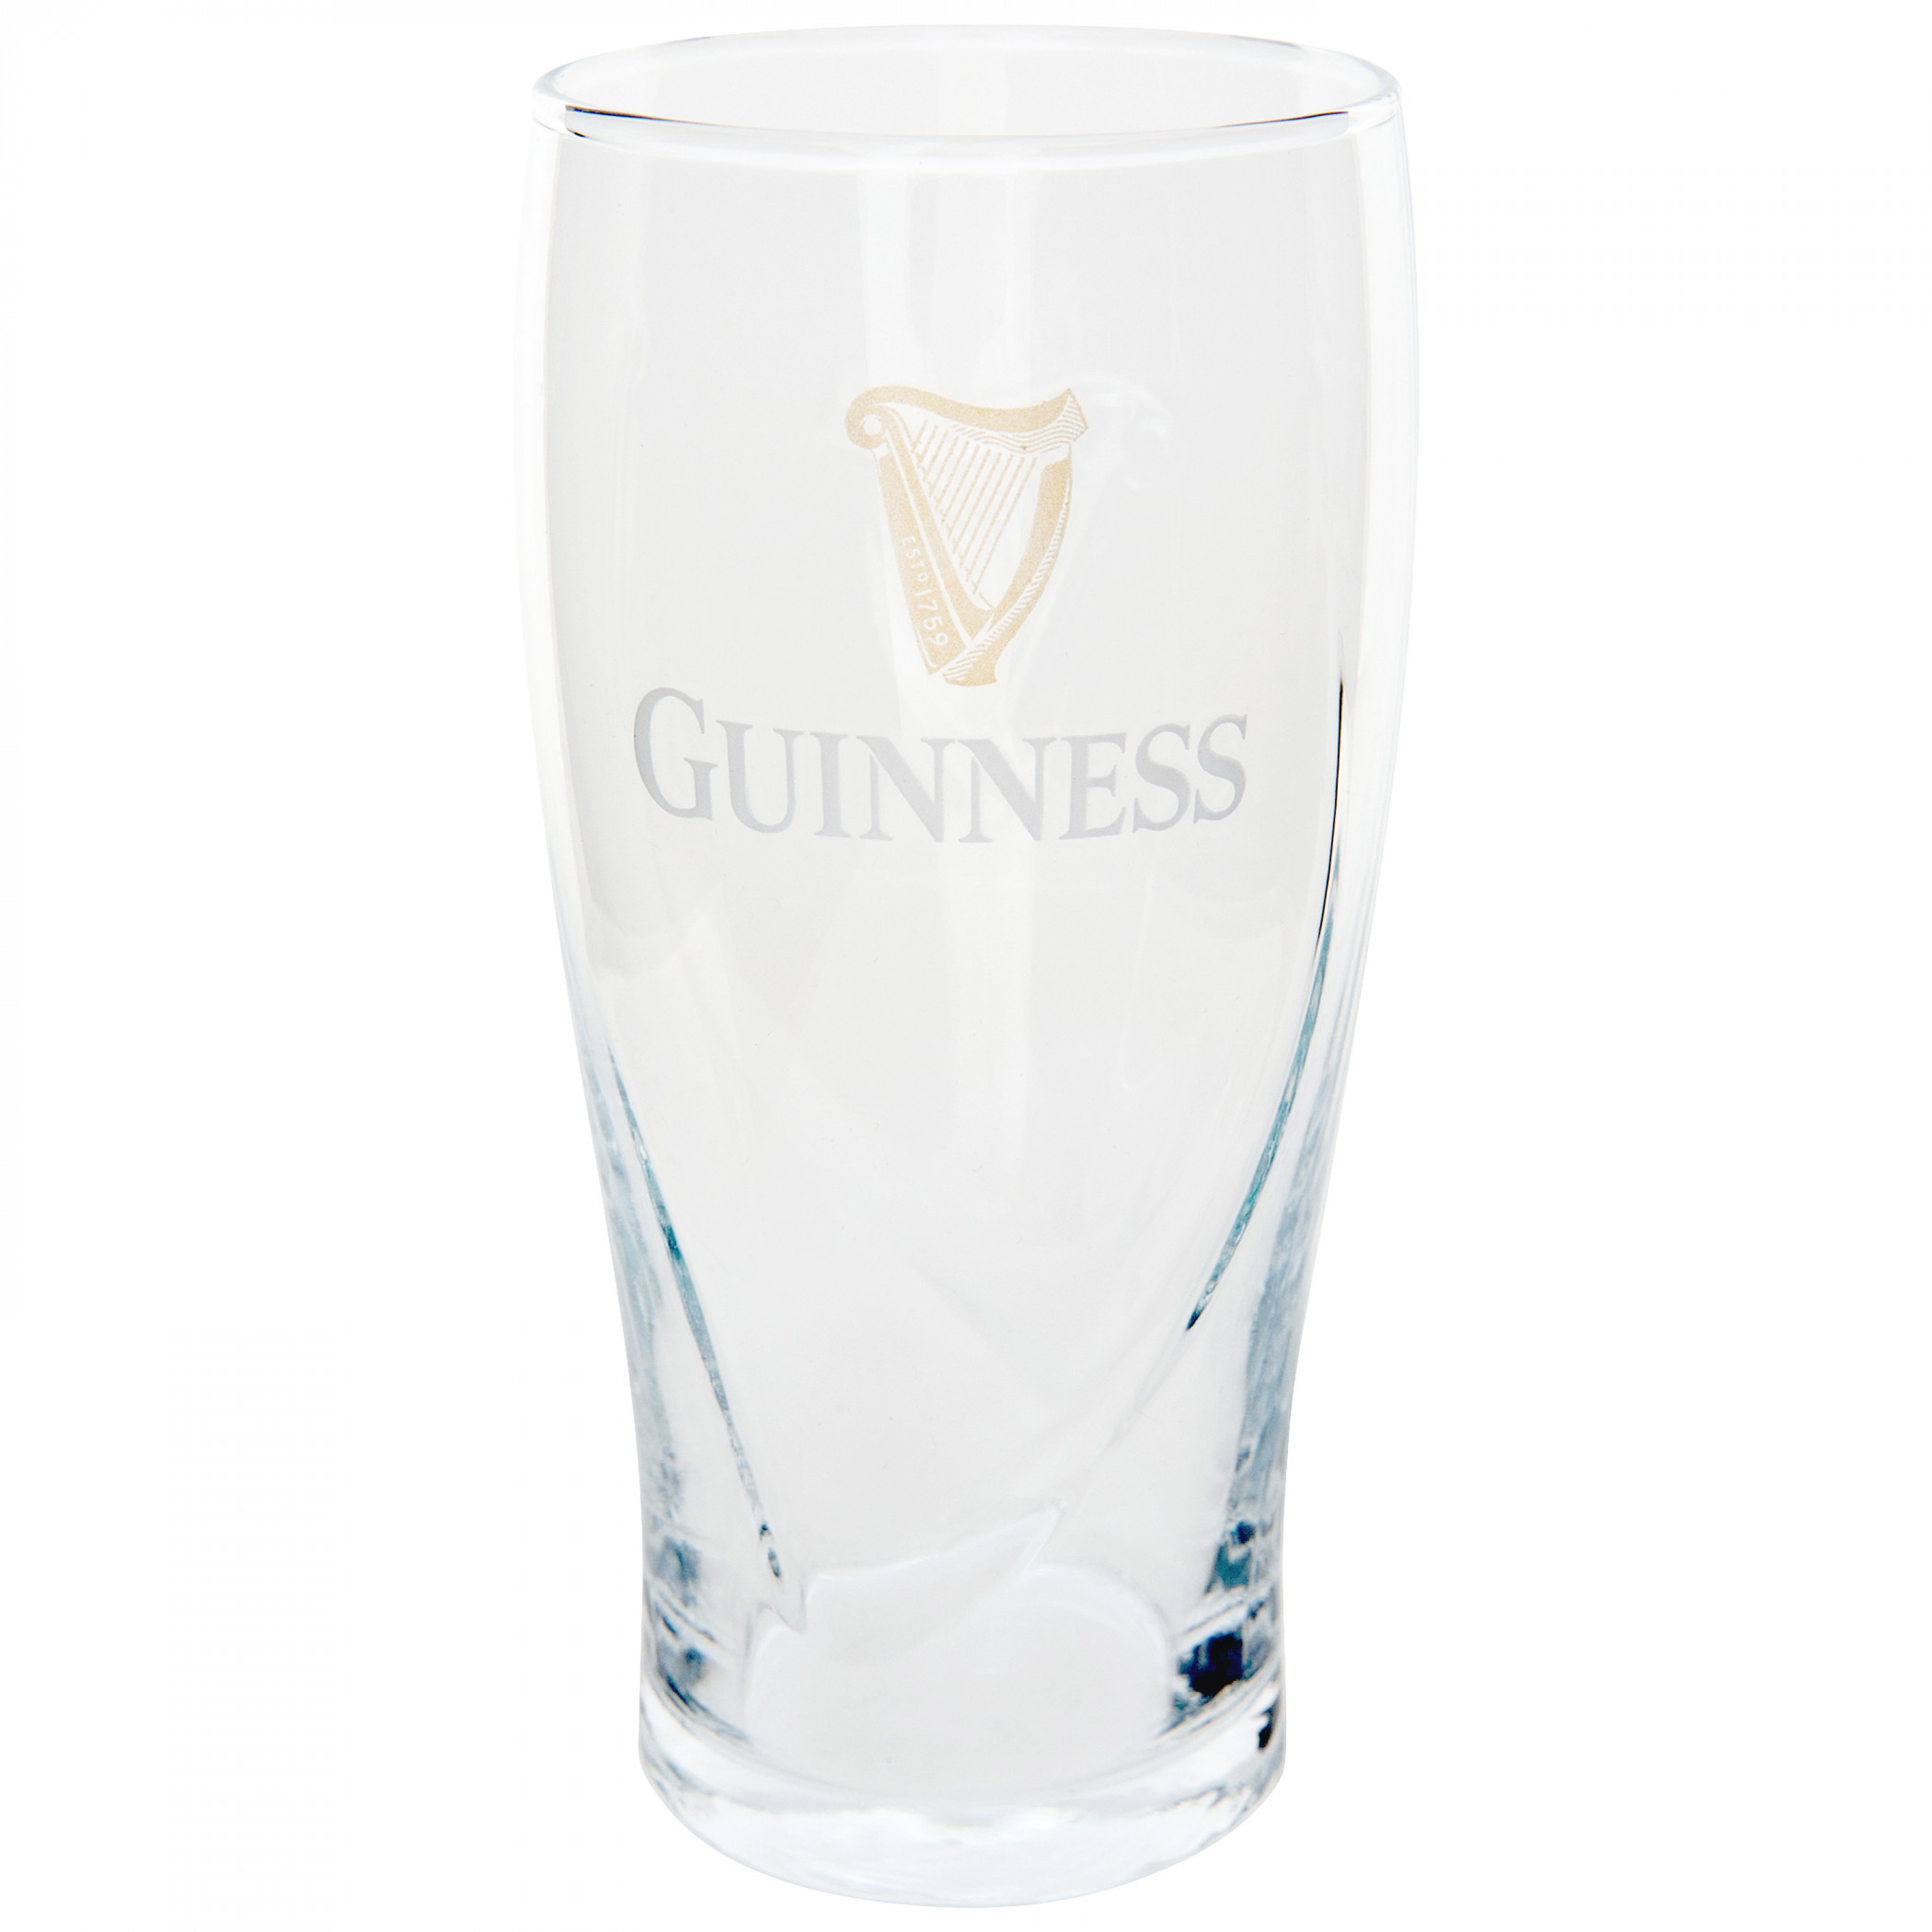 Guinness Imperial 20oz Pint Glass